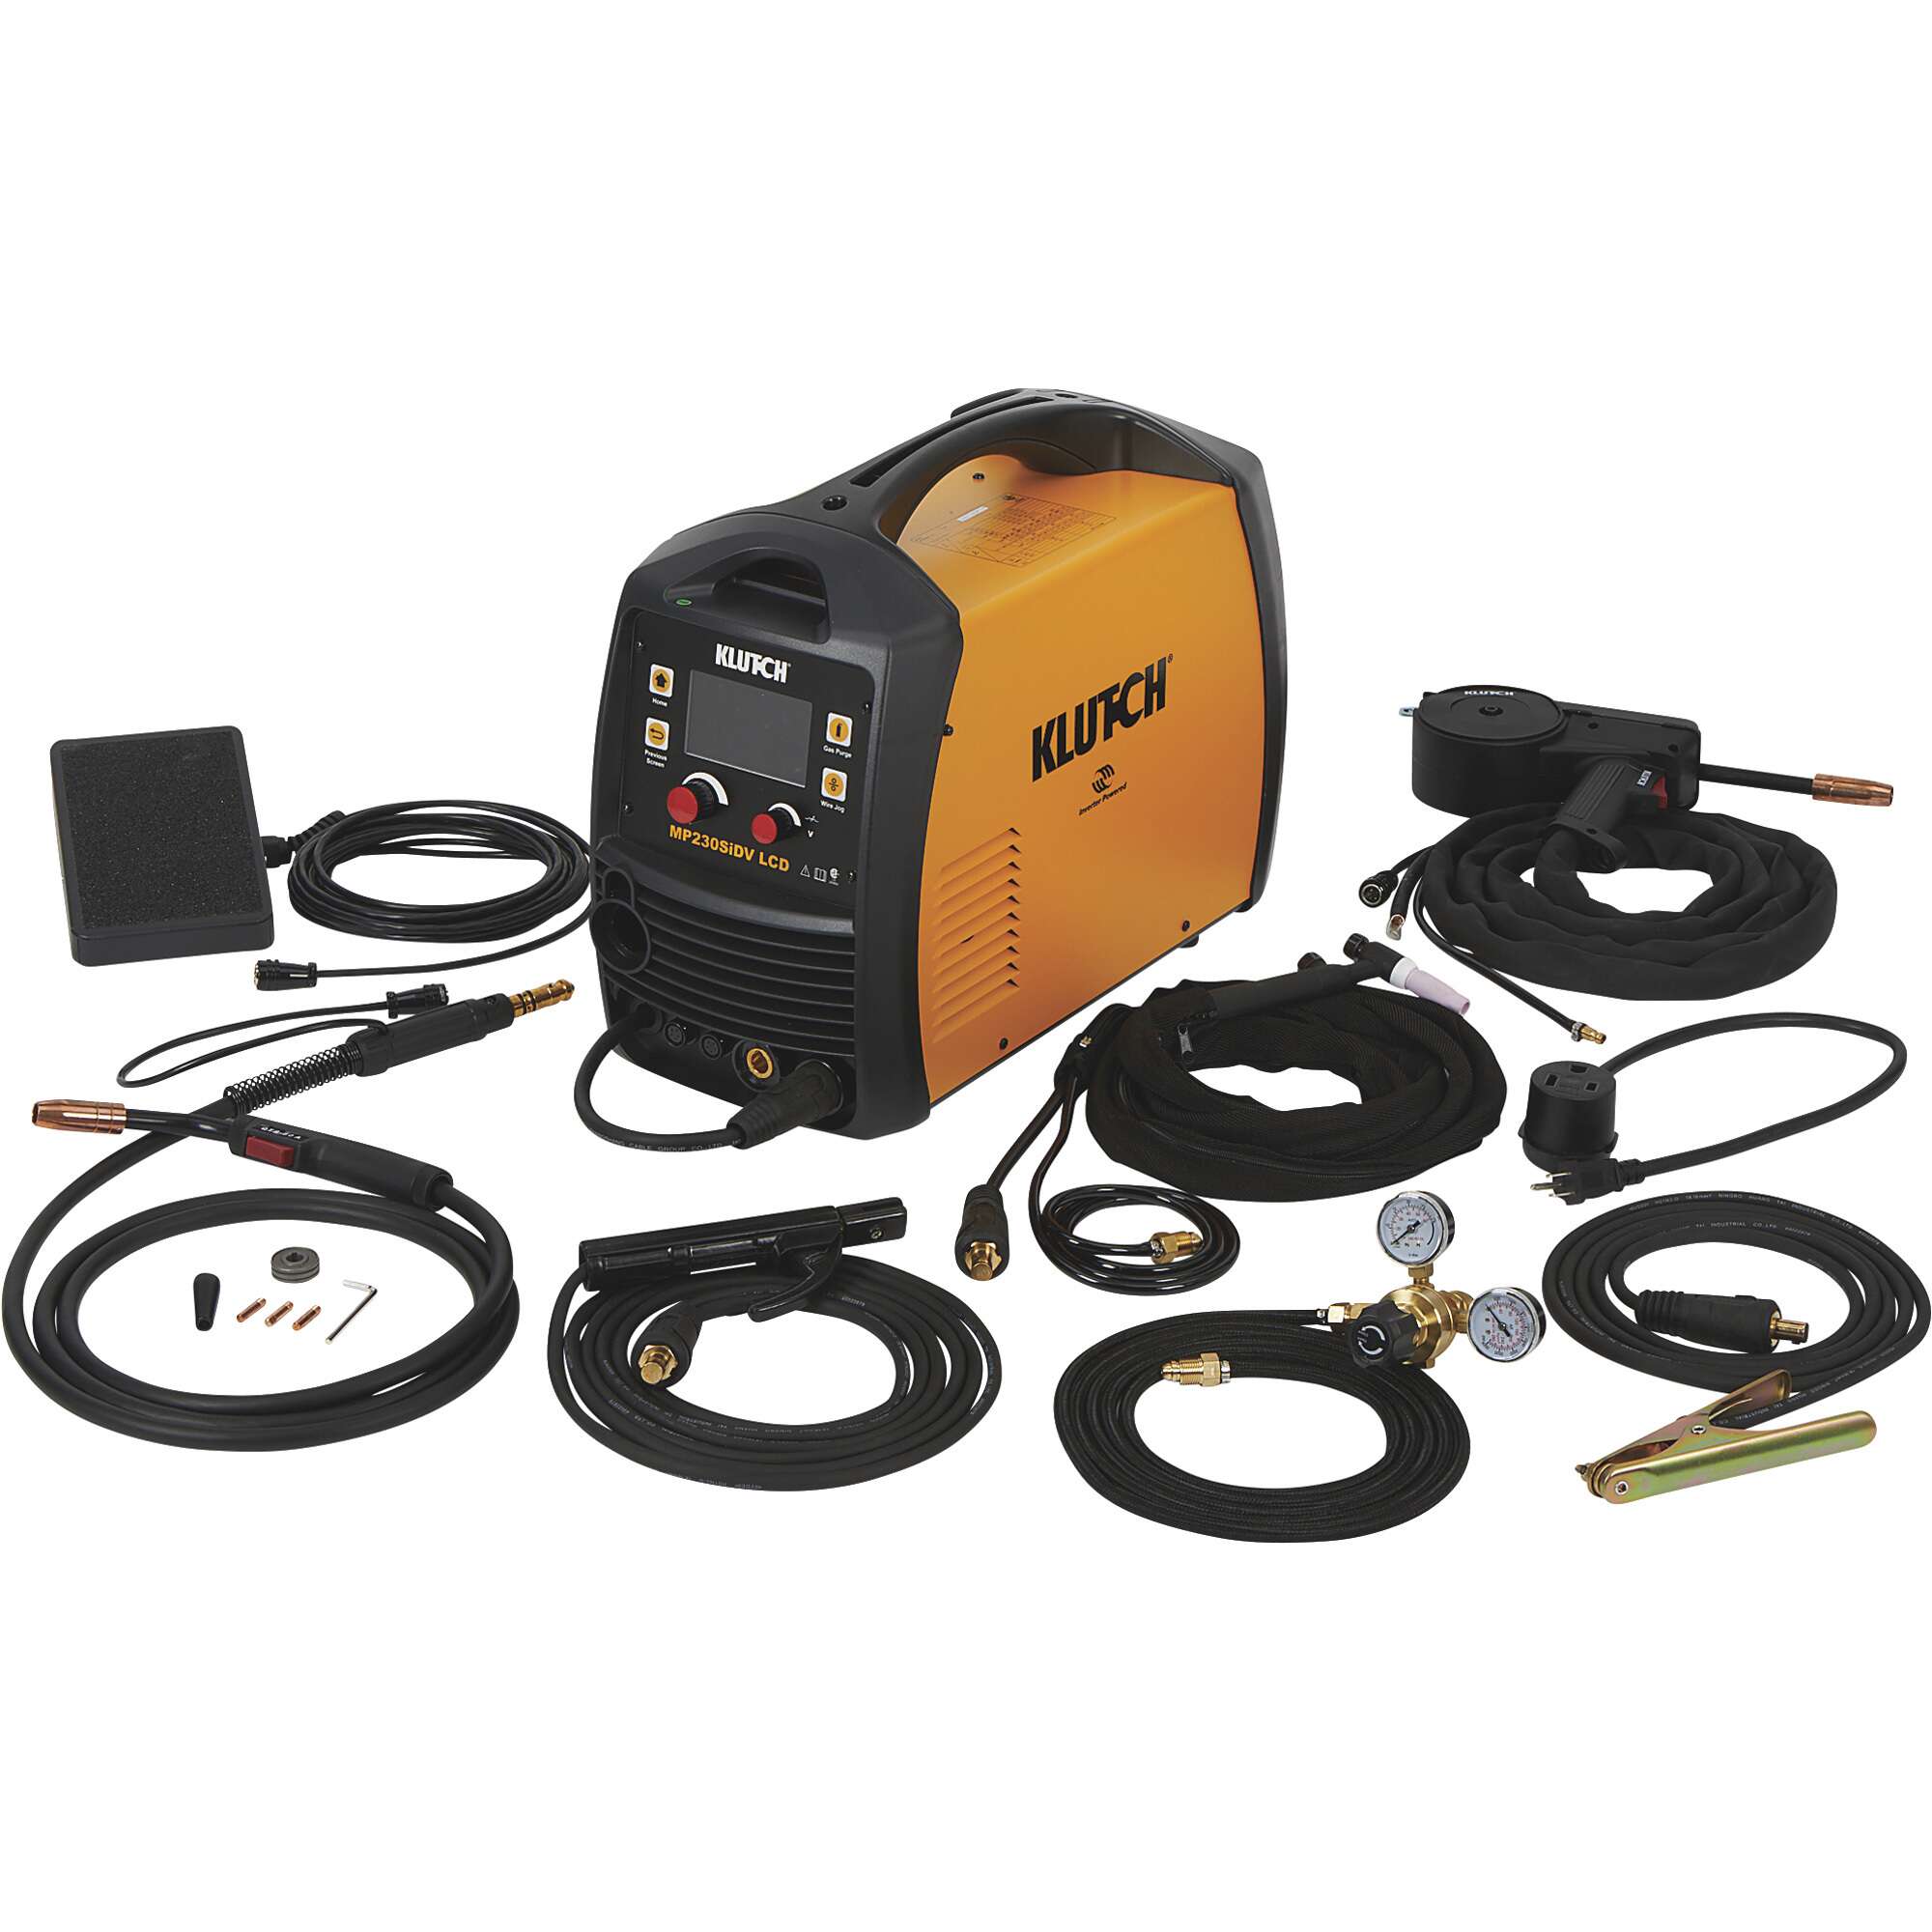 Klutch MP230SiDV LCD MIG Welder with Multi Processes Spool Gun LCD Display and Dual Voltage